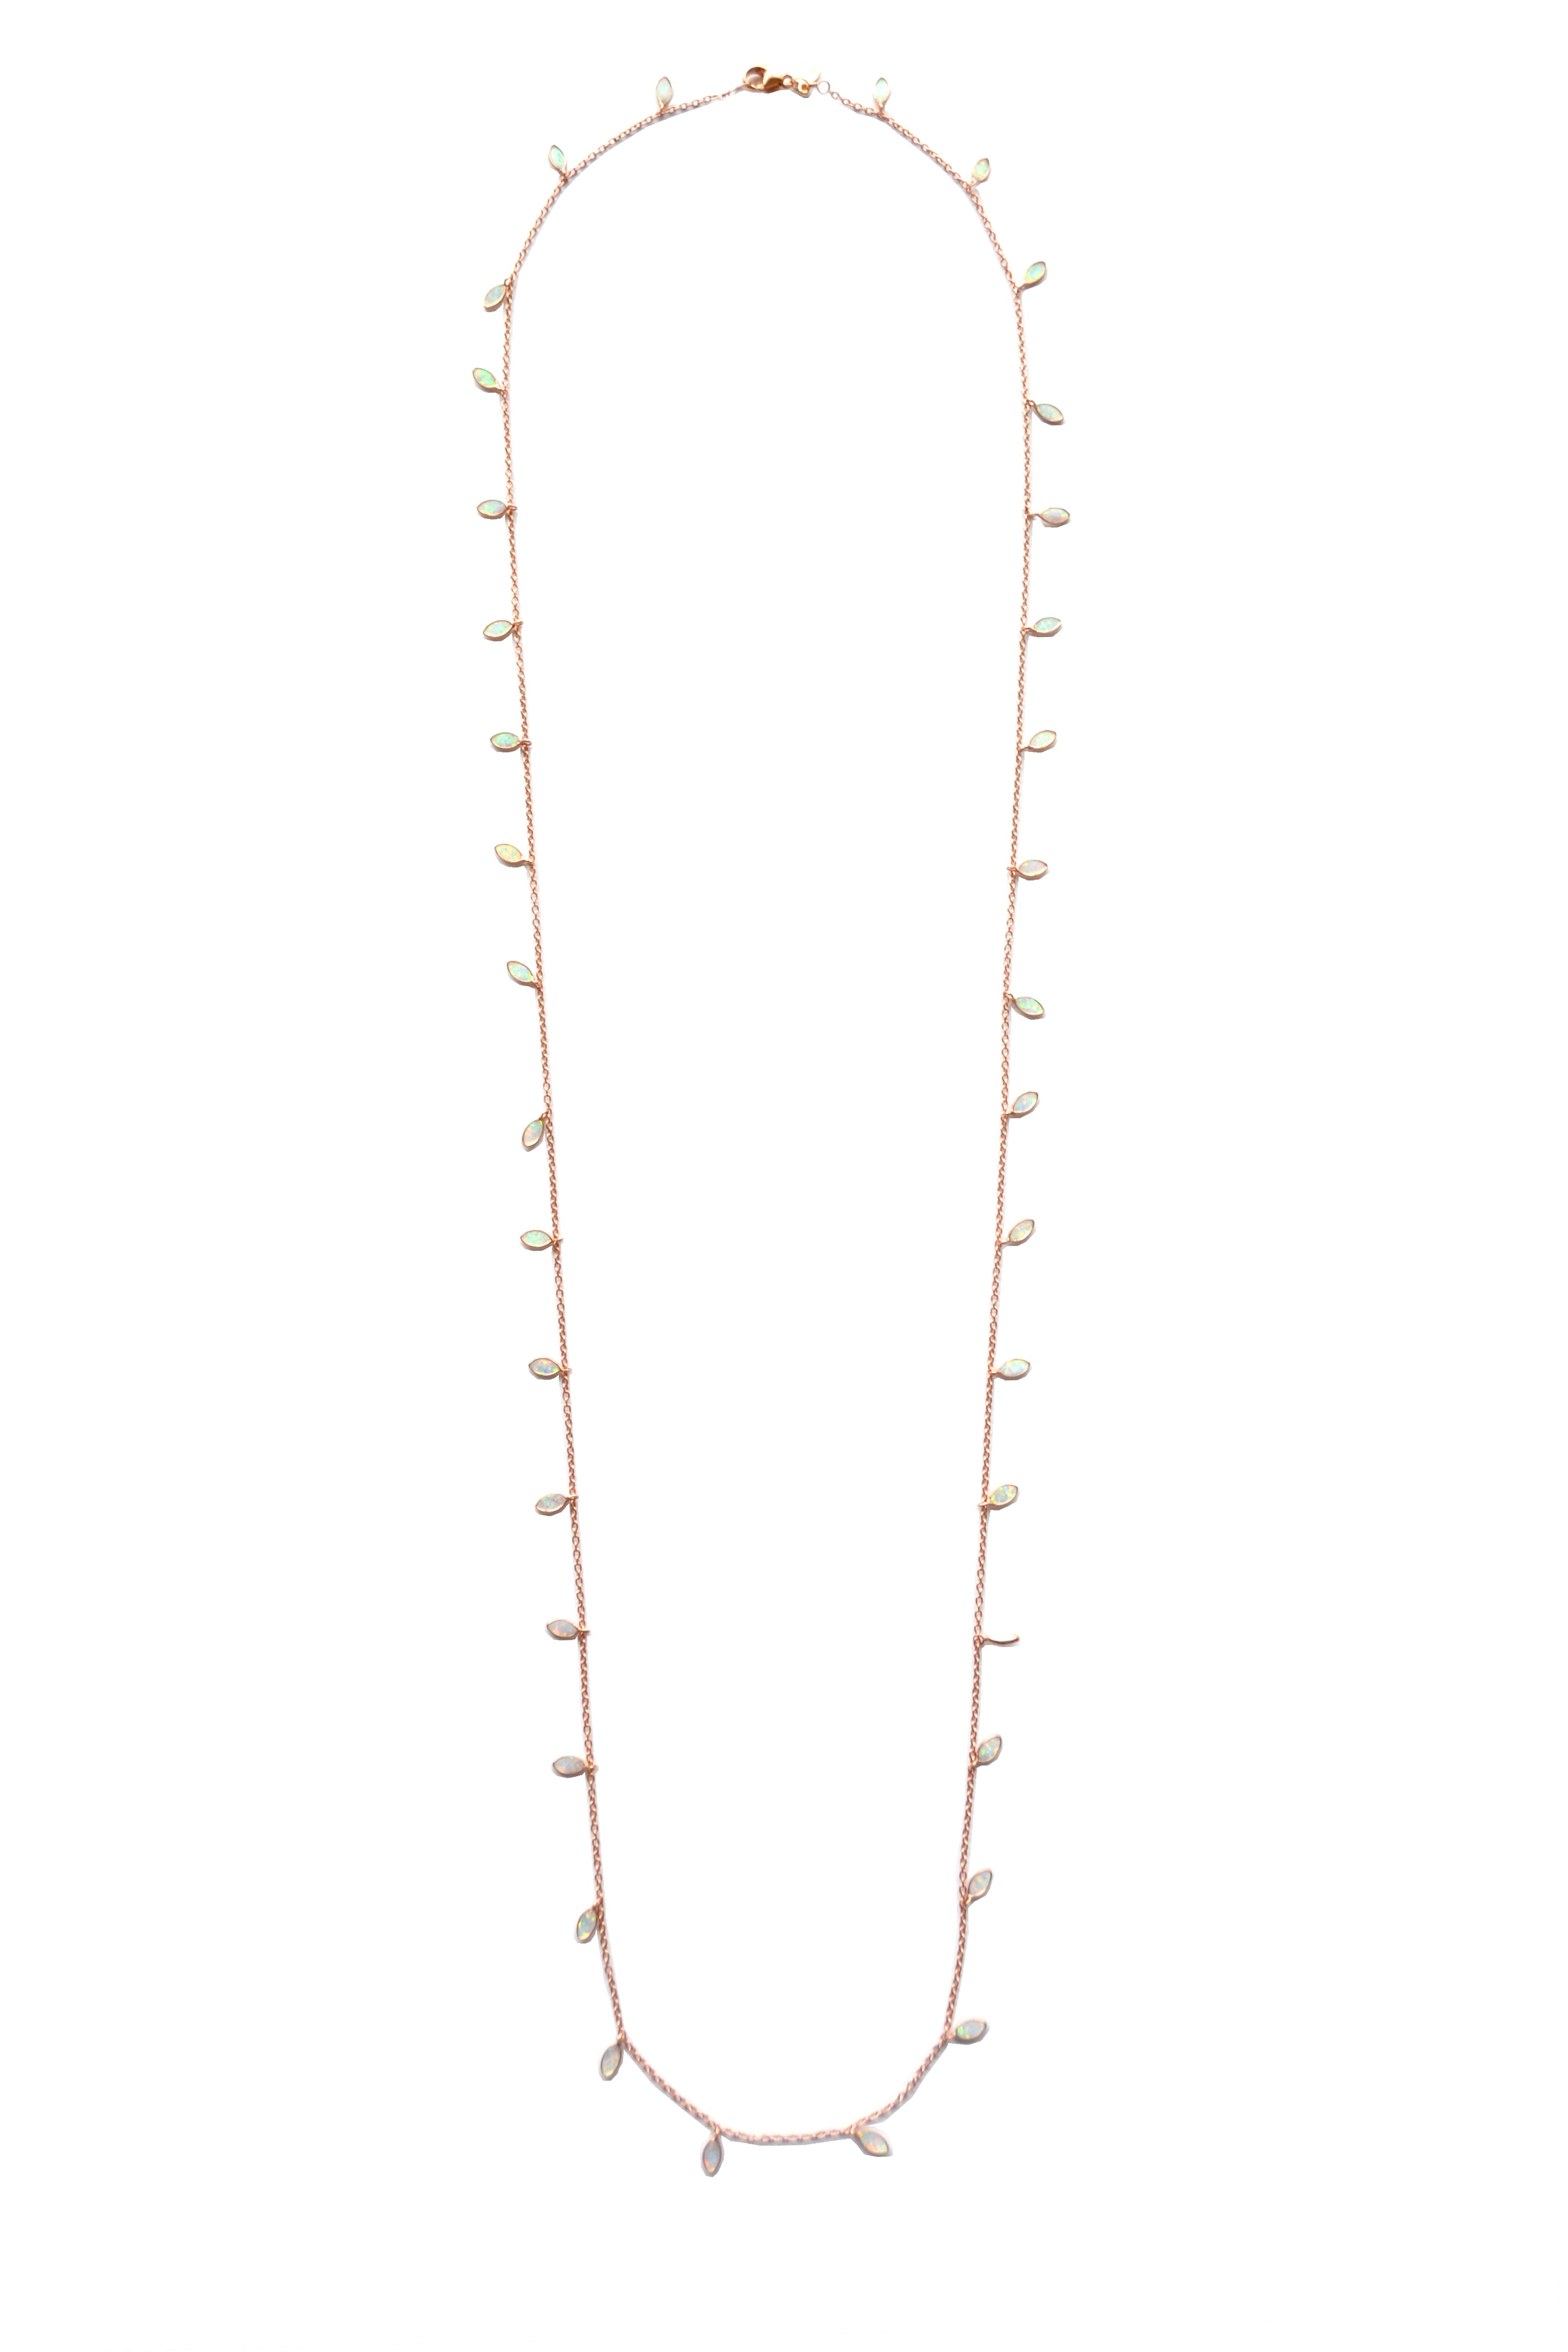 Single Strand Opal Marquise Necklace in Rose Gold